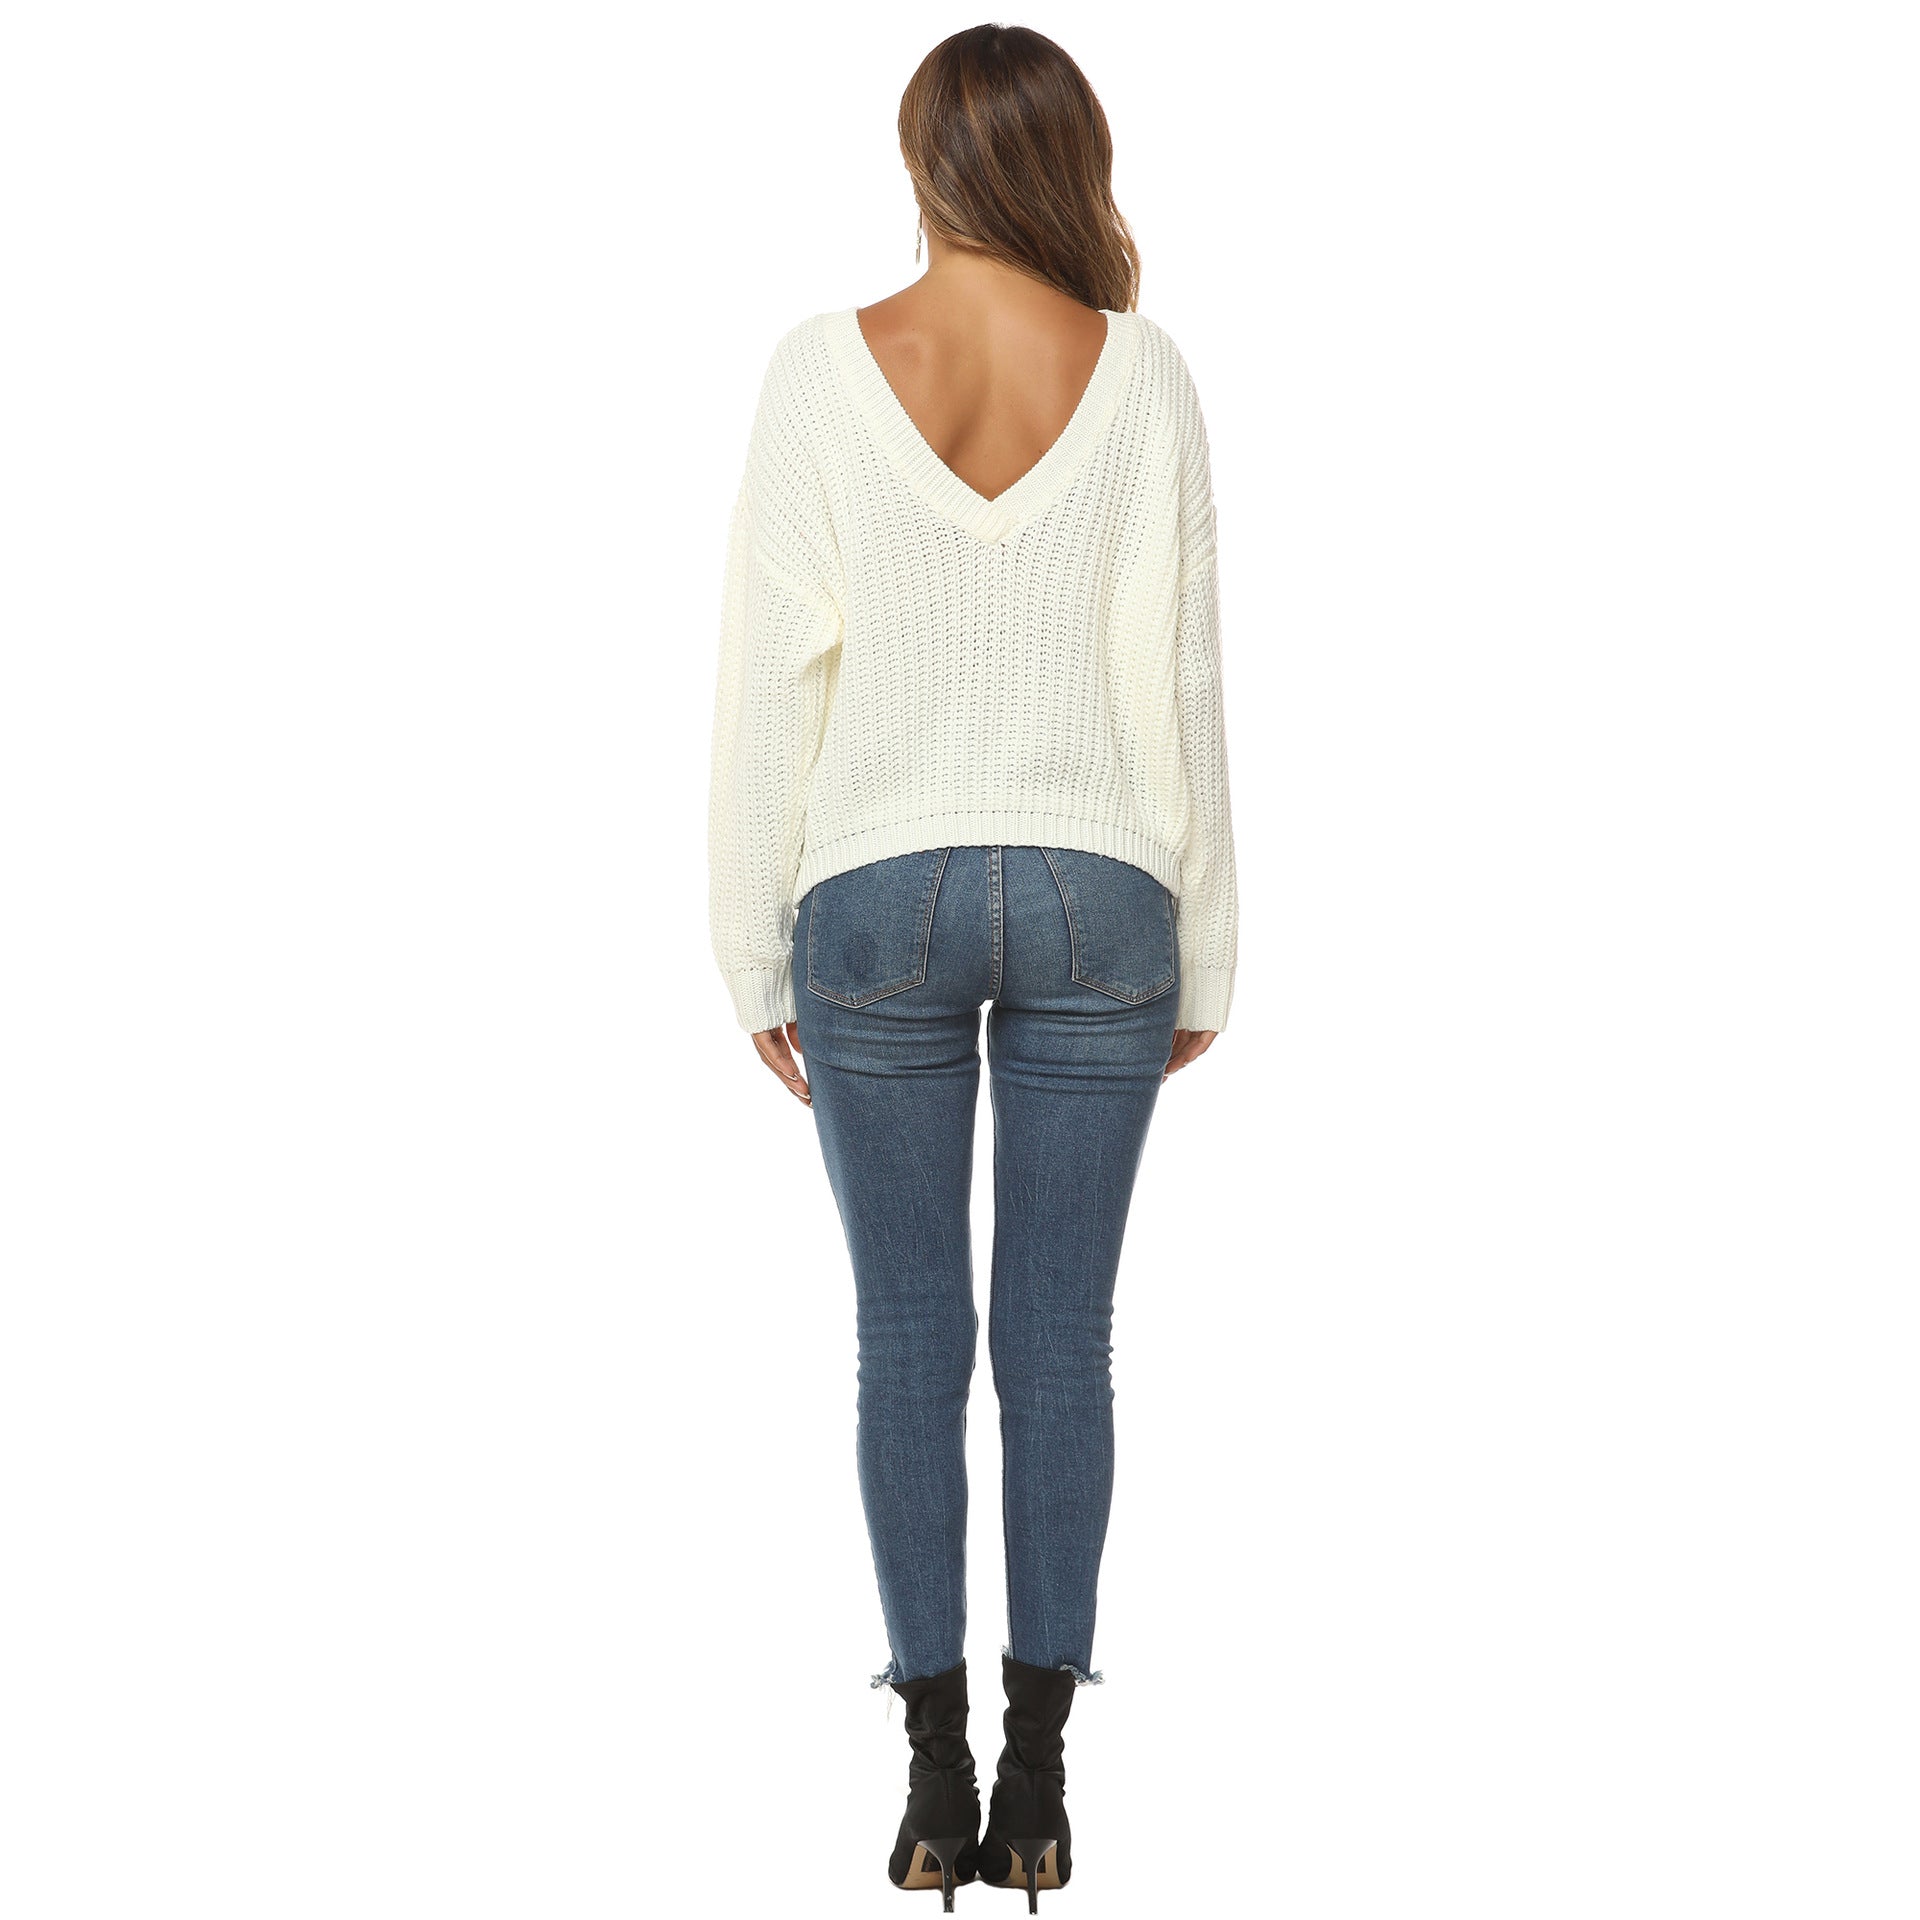 Chic V Back Sweaters for Winter Fall